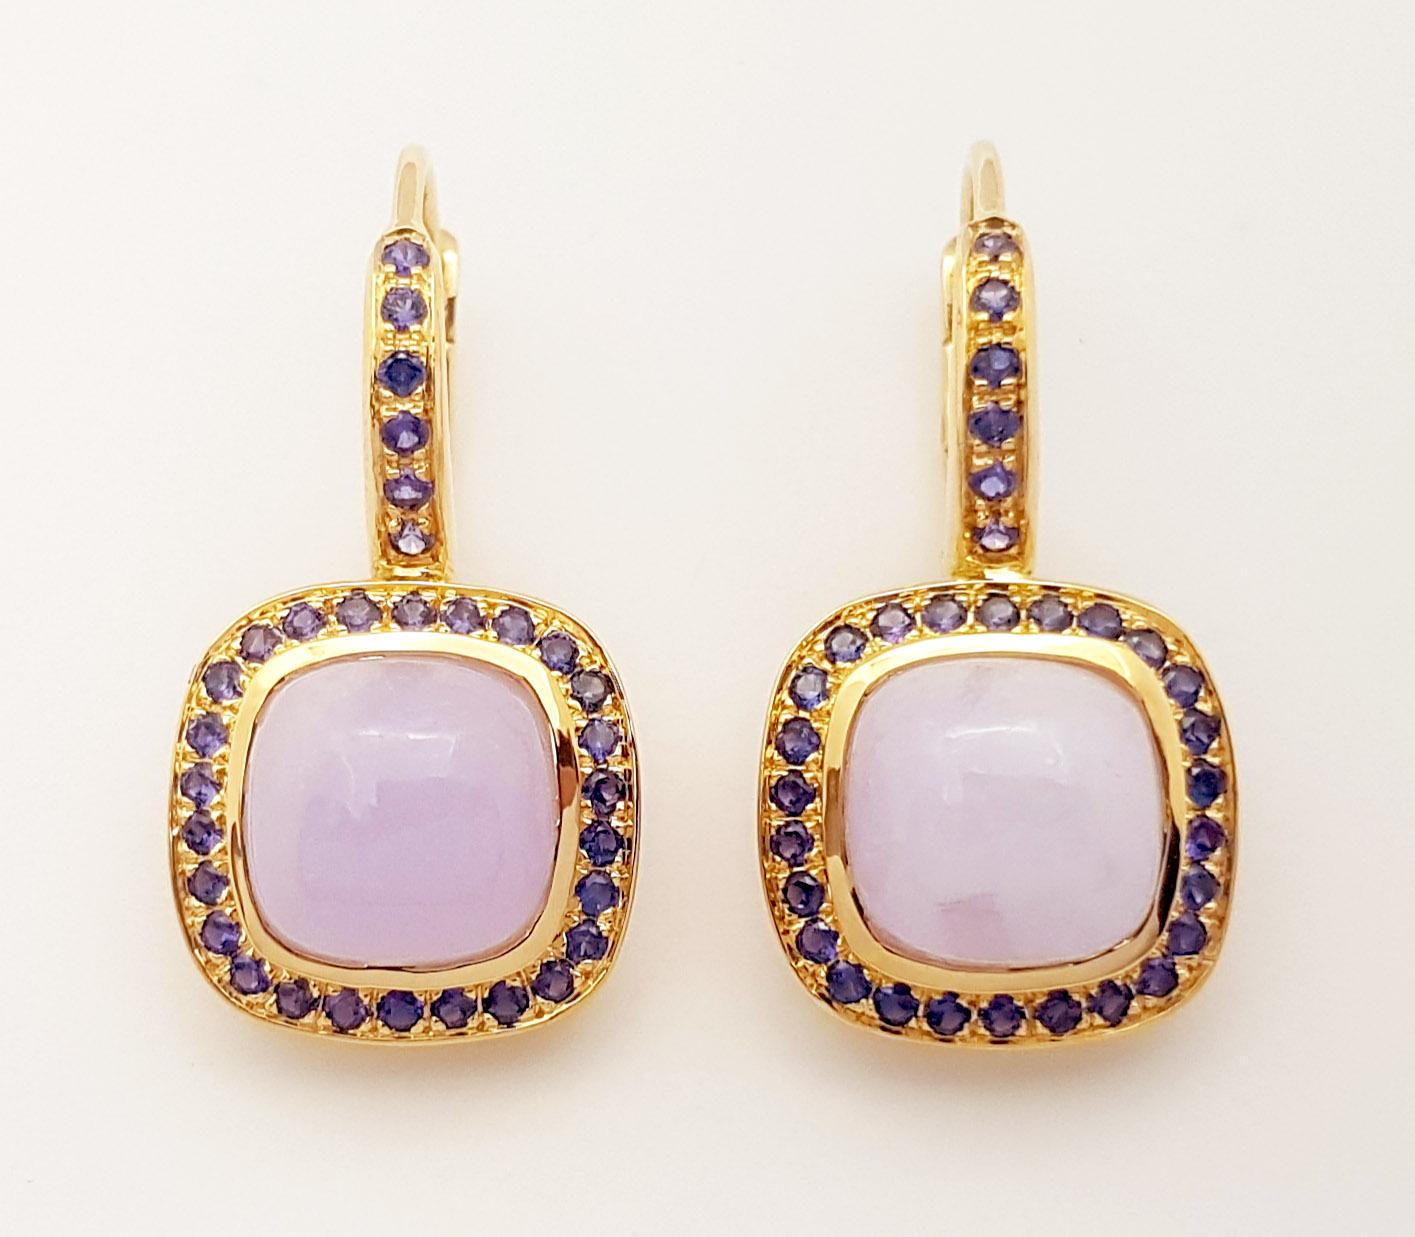 Lavender Jade 8.50 carats with Purple Sapphire 0.53 carat Earrings set in 18K Gold Settings

Width: 1.3 cm 
Length: 1.9 cm
Total Weight: 9.20 grams

